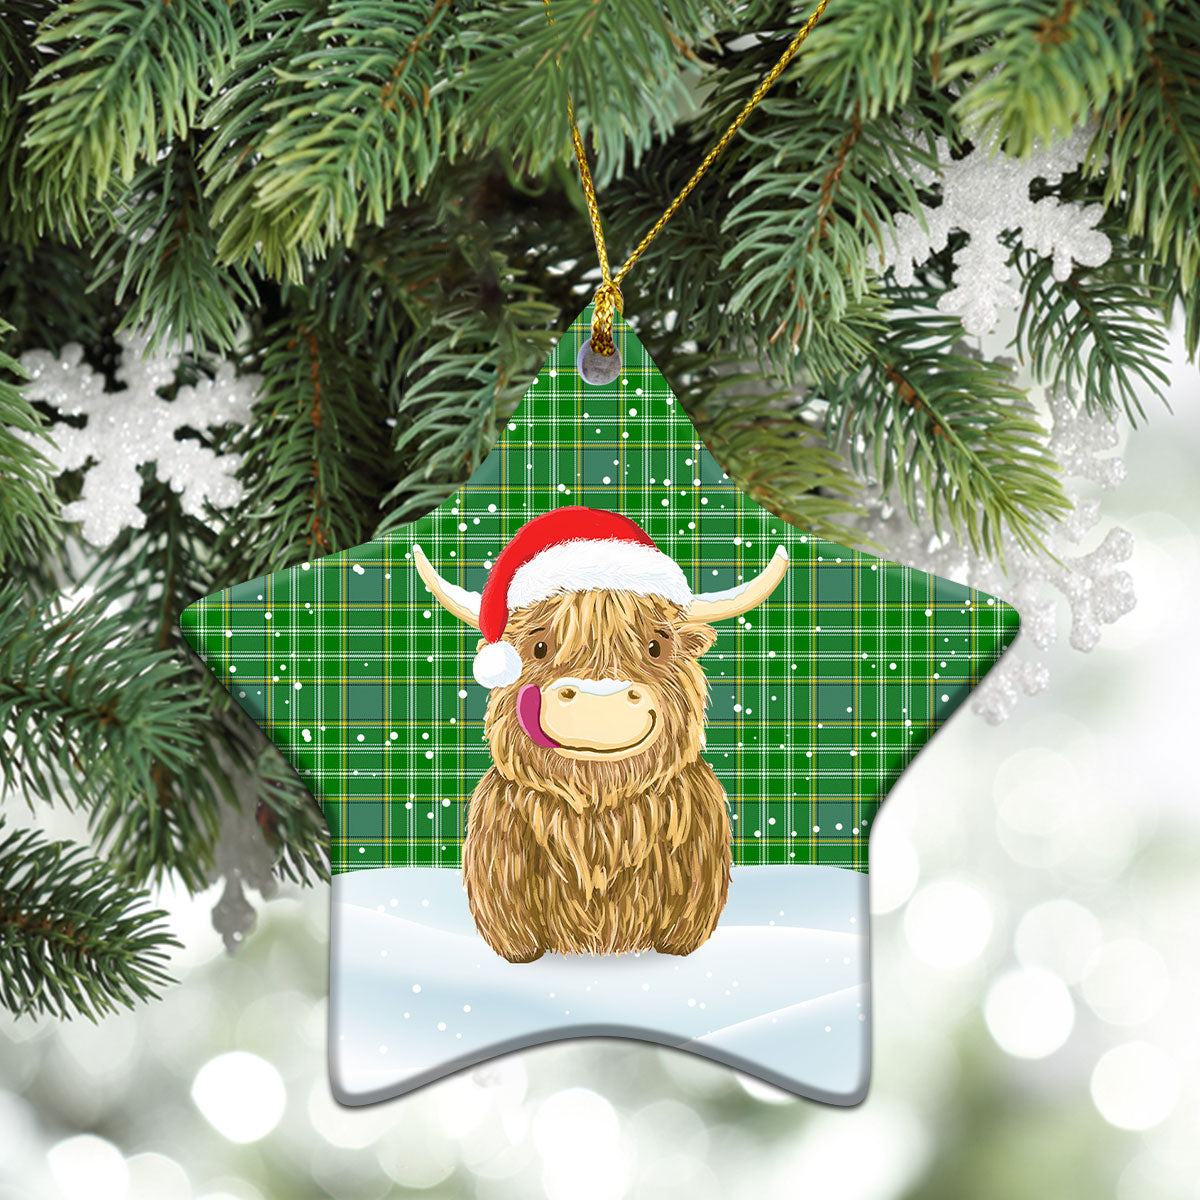 Currie or Curry Tartan Christmas Ceramic Ornament - Highland Cows Style